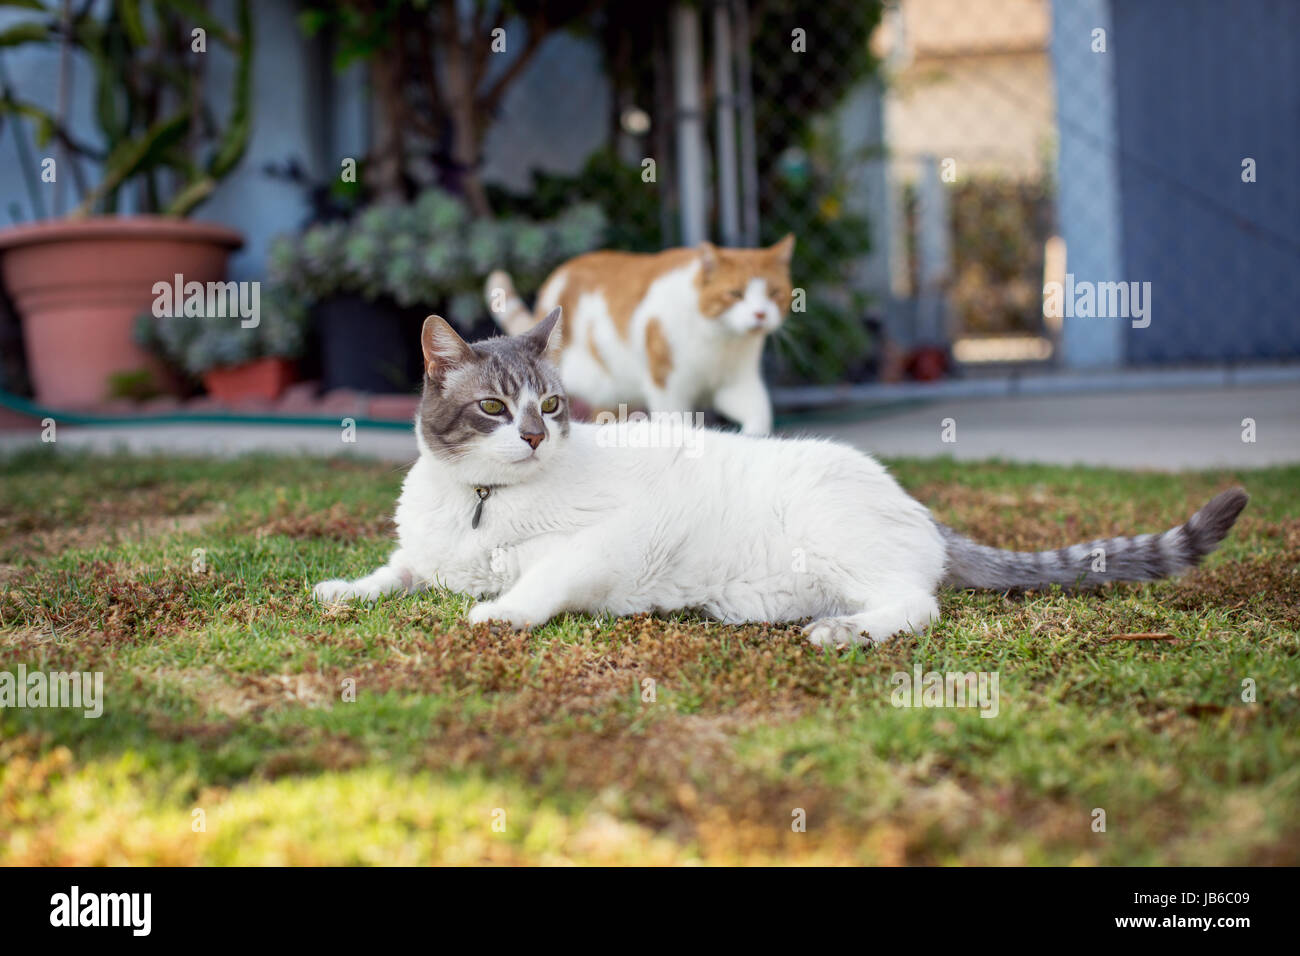 White cat lounging on grass lawn in front yard while an orange cat saunters past in the background. Stock Photo